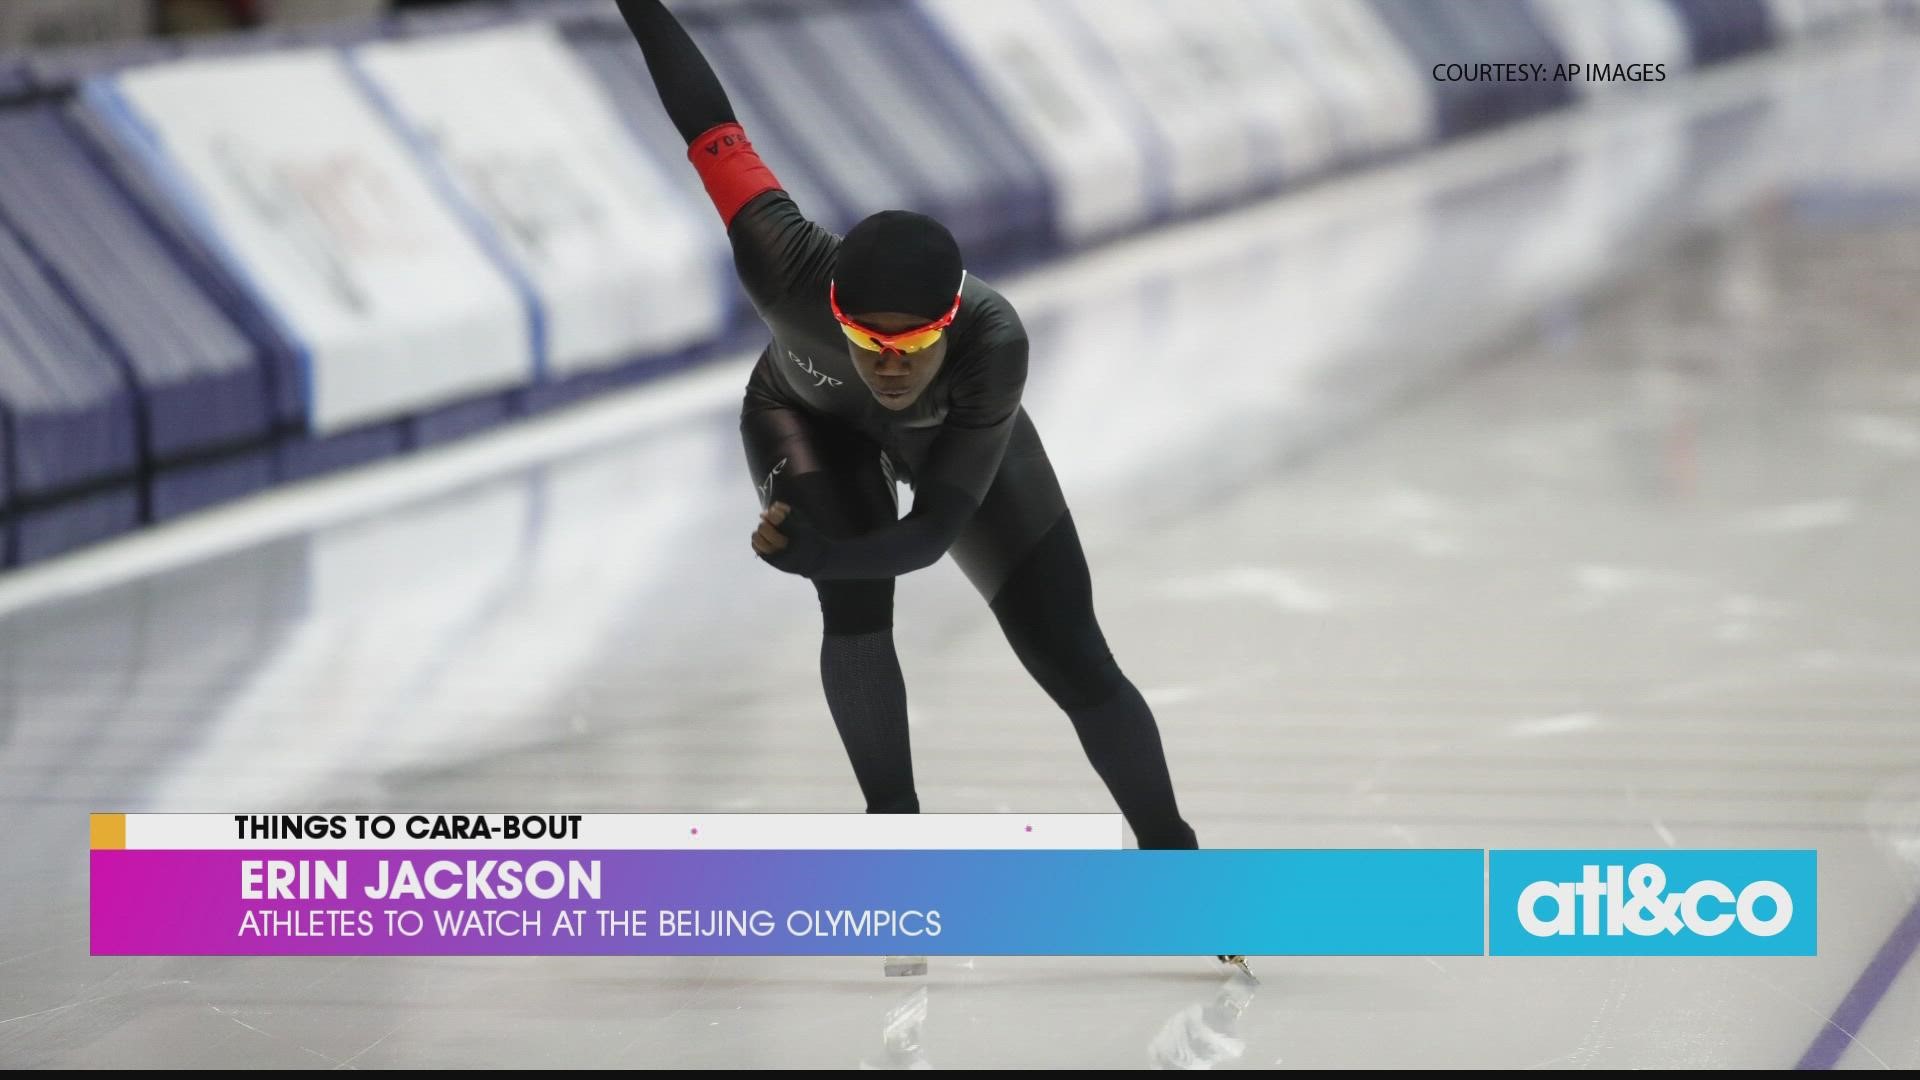 GO TEAM USA! Cara Kneer previews the athletes to watch at the upcoming Winter Olympics in Beijing, only on 11Alive.